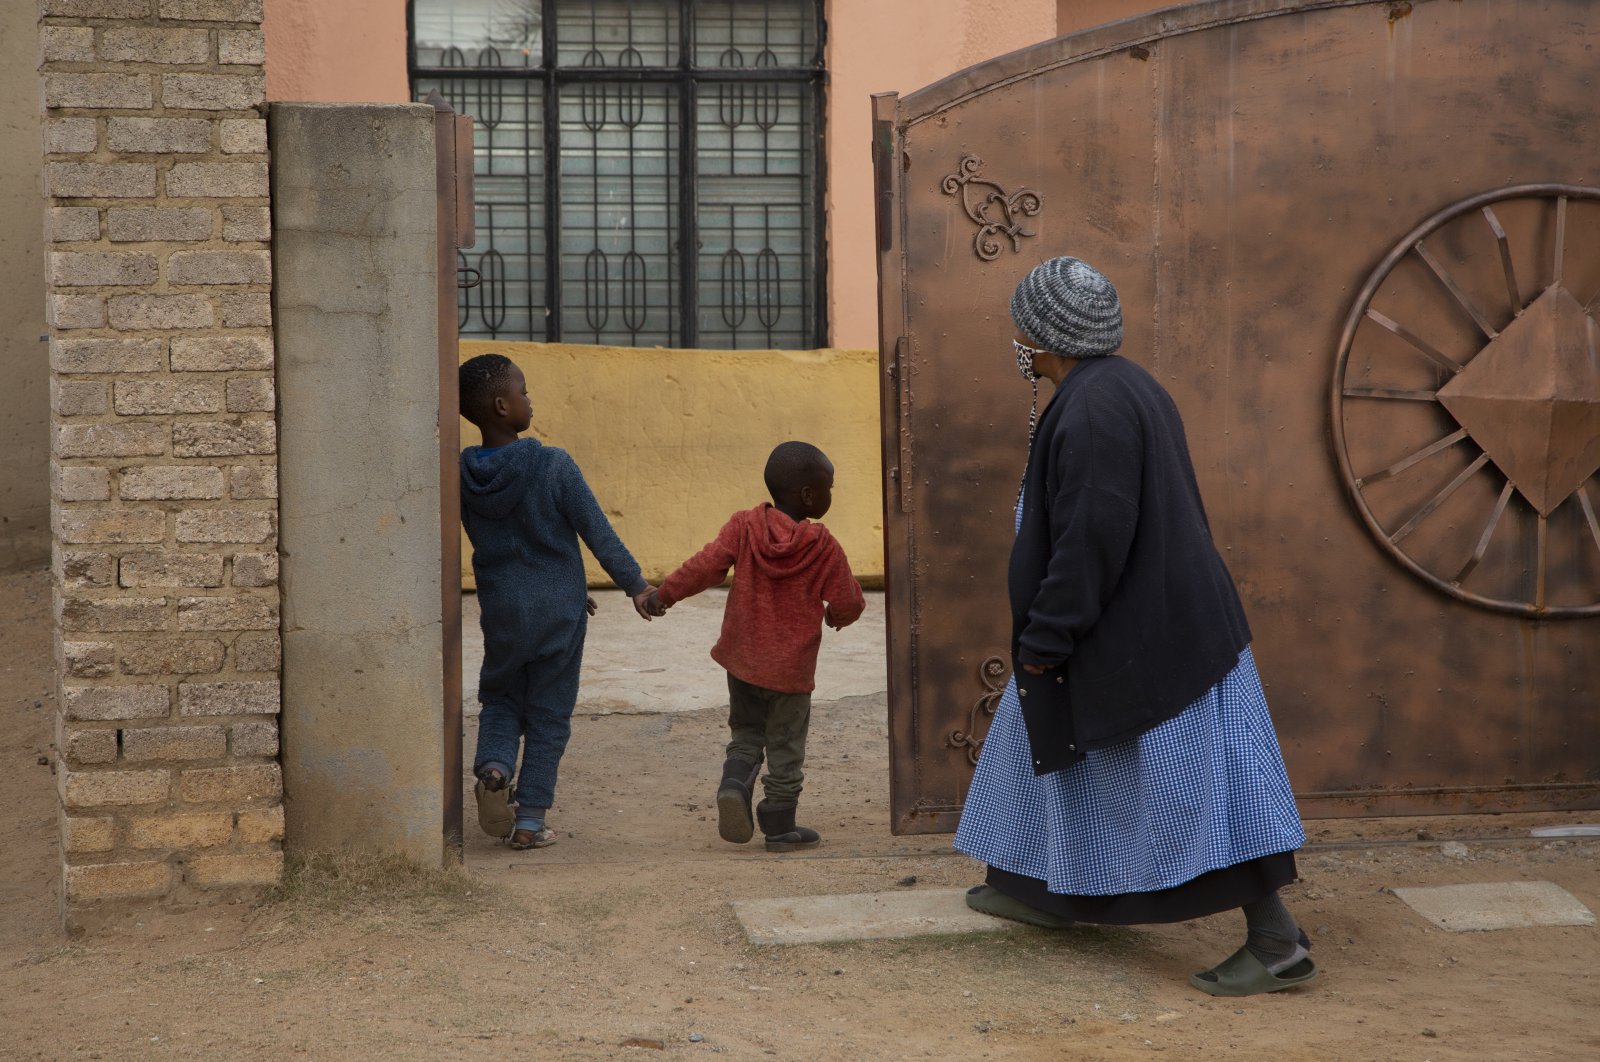 An elderly woman and children enter the property of the home of Gosiame Thamara Sithole in Tembisa, near Johannesburg, South Africa, June 10, 2021. (AP Photo)